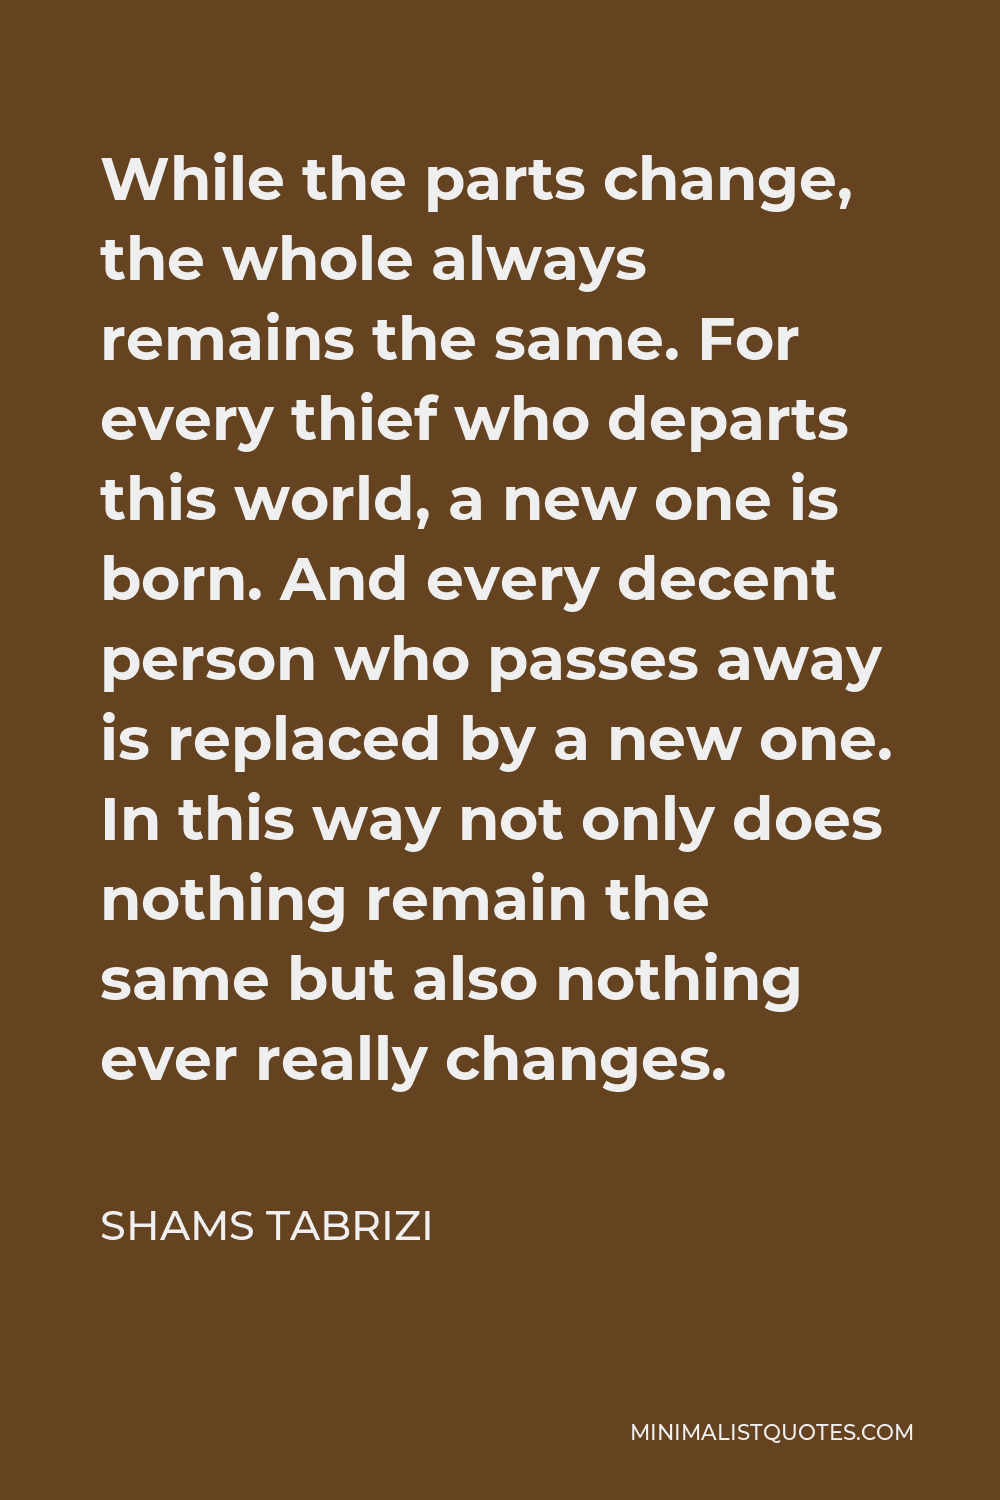 Shams Tabrizi Quote - While the parts change, the whole always remains the same. For every thief who departs this world, a new one is born. And every decent person who passes away is replaced by a new one. In this way not only does nothing remain the same but also nothing ever really changes.